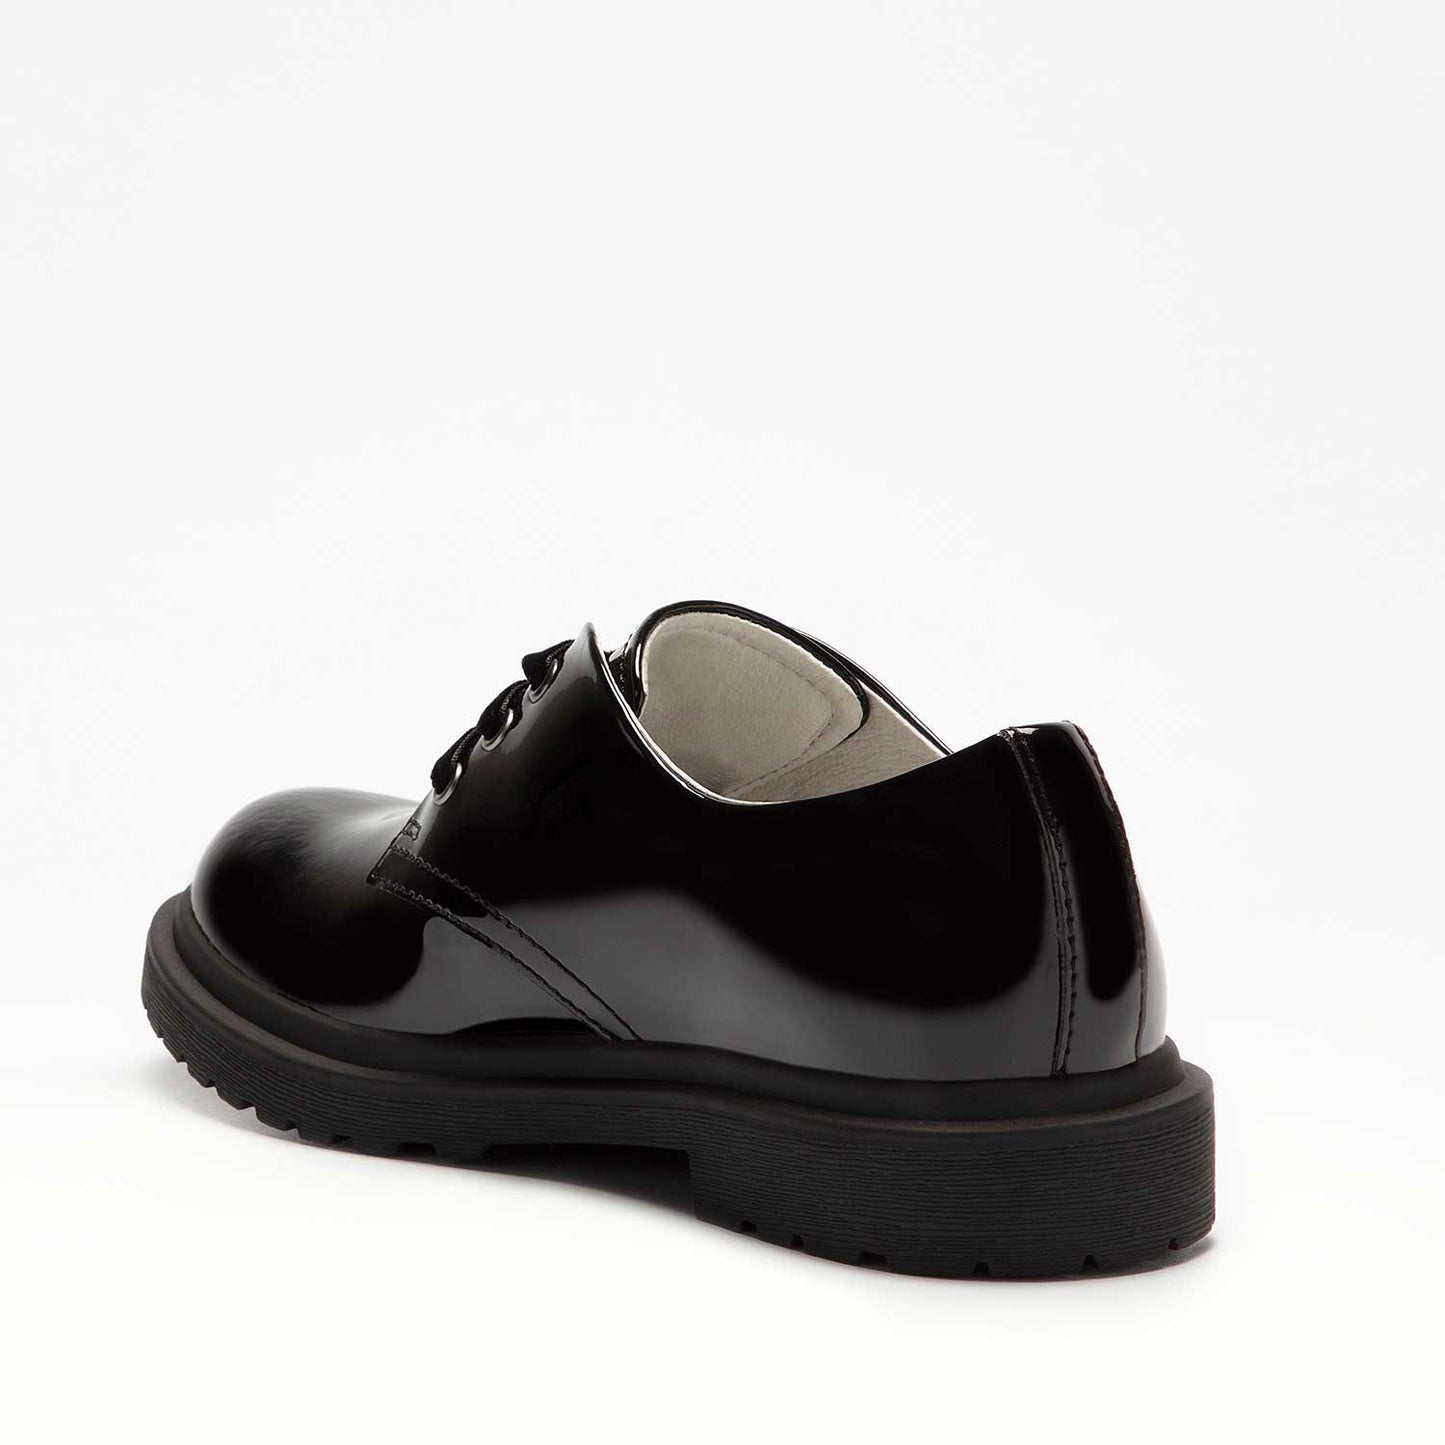 A girls school shoe by Lelli Kelly, style Elaine, in black patent with lace fastening. inner side view.